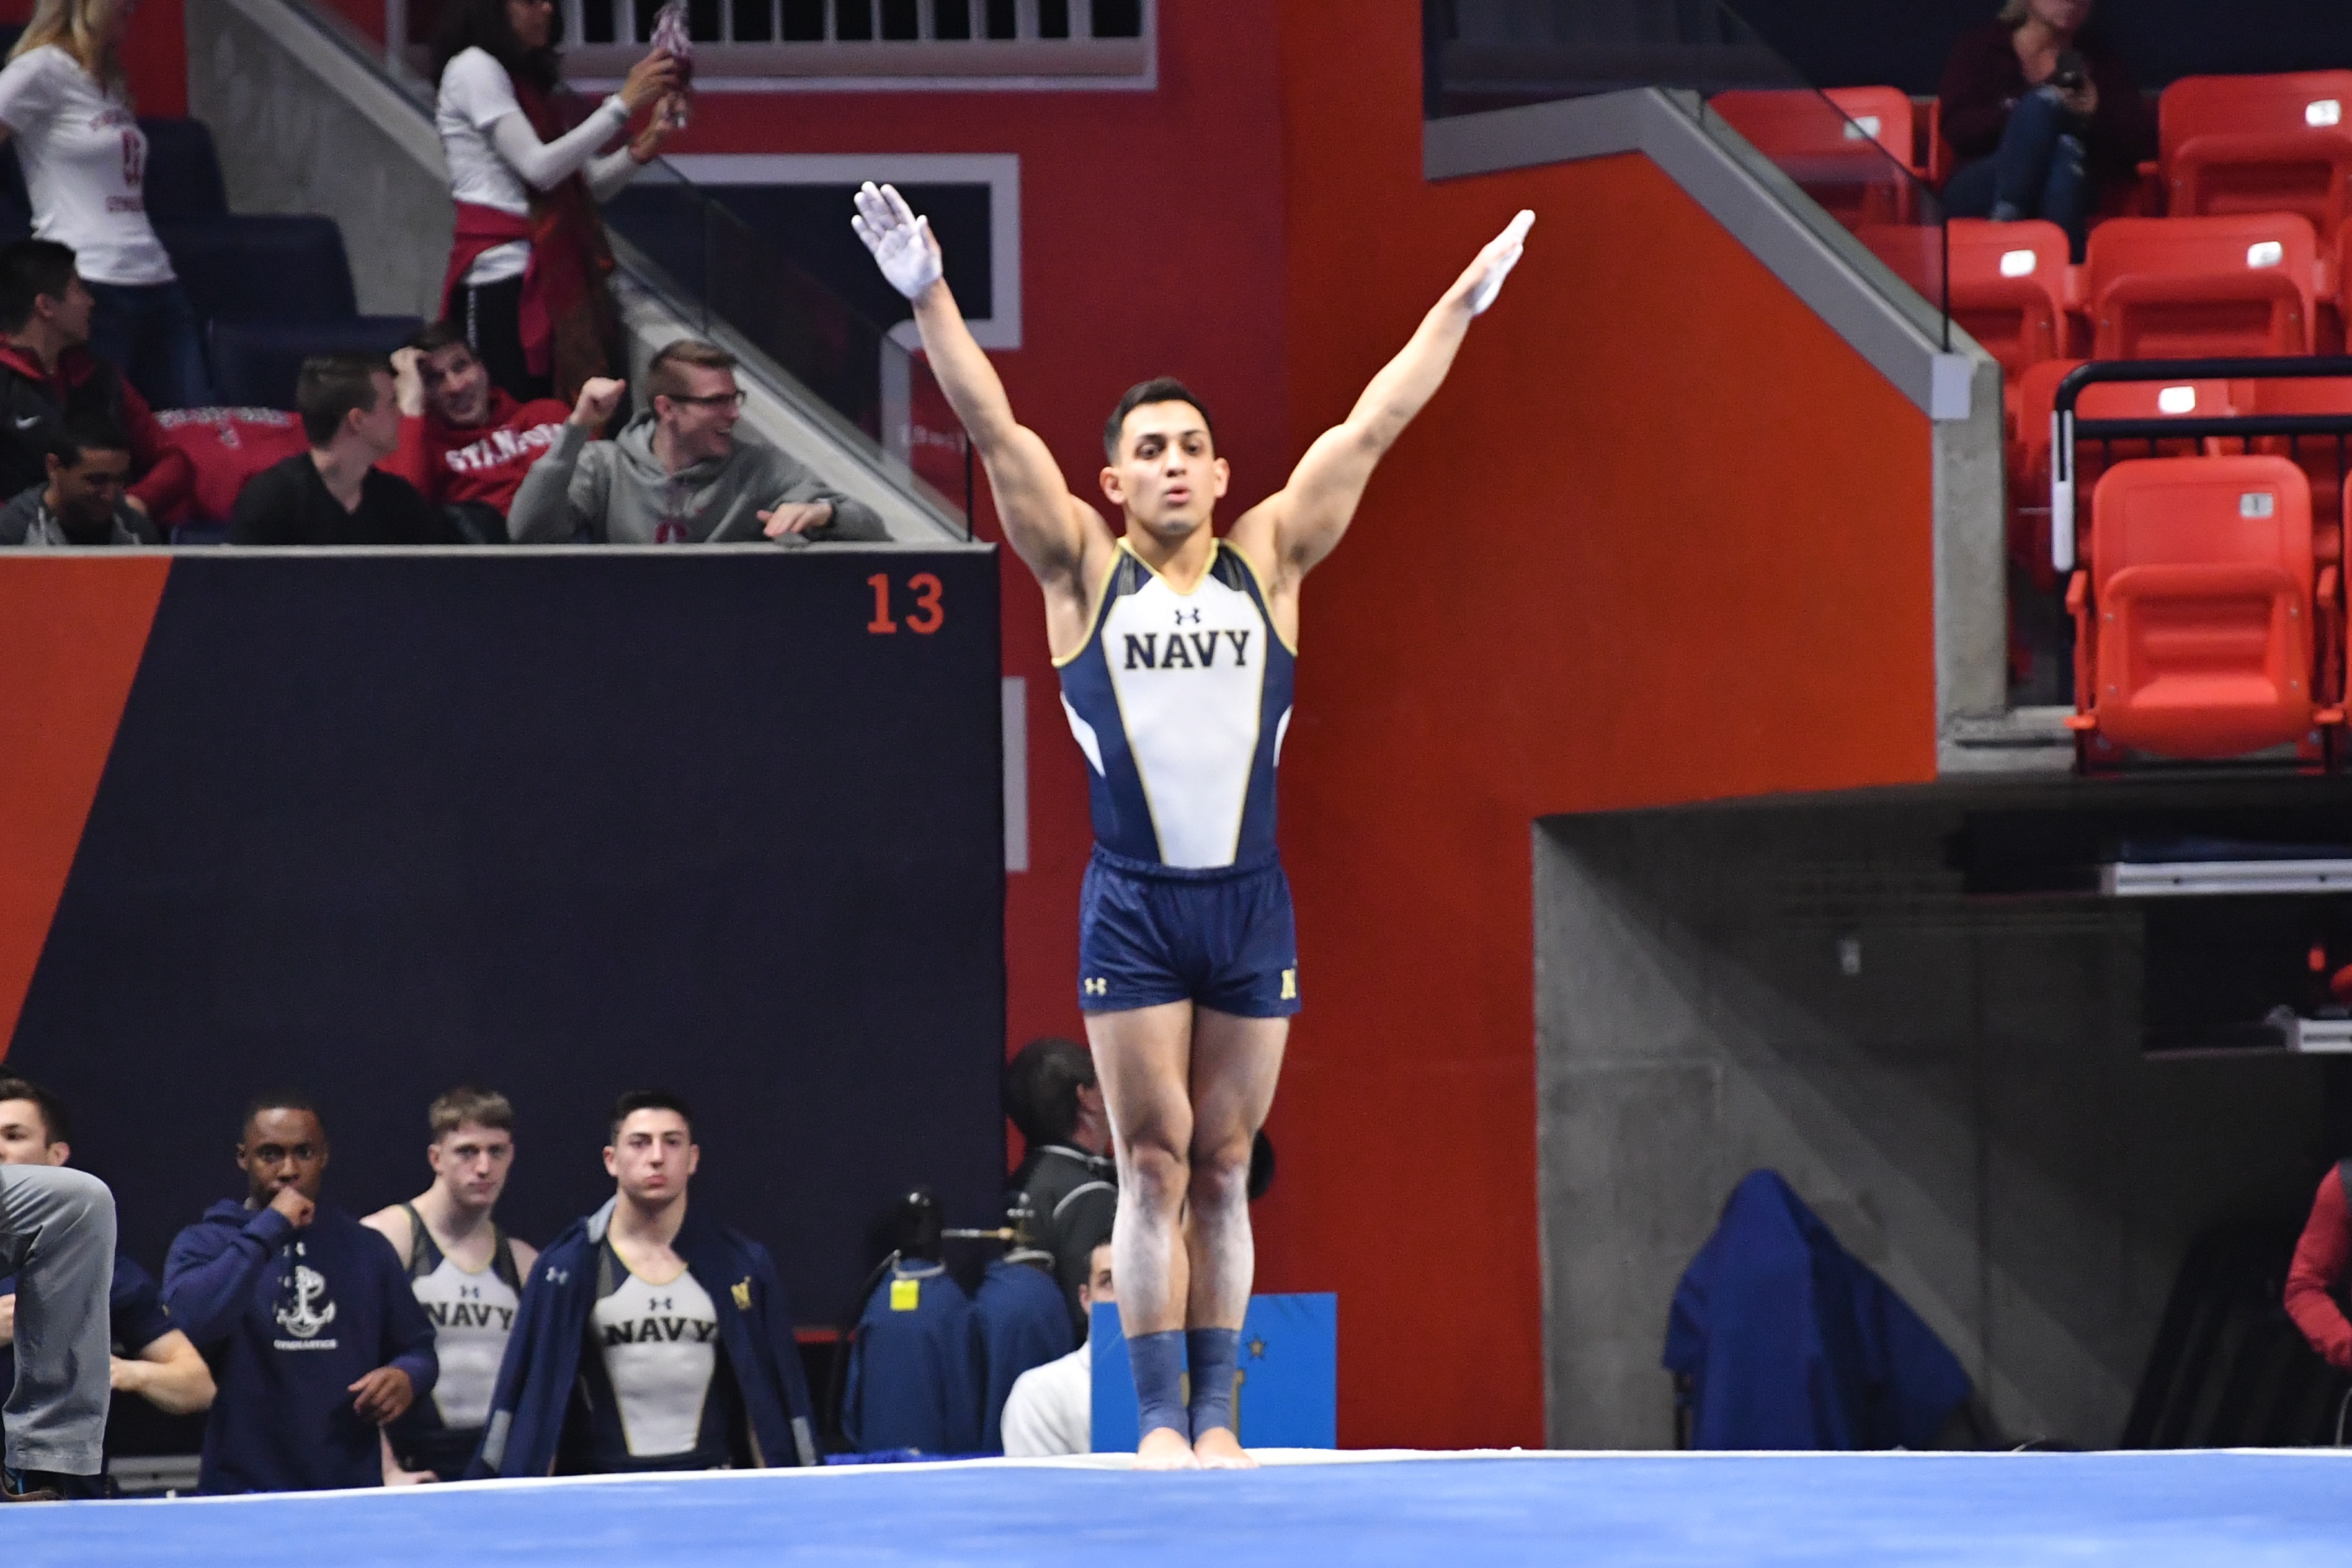 Navy Men’s Gymnastics on Competitive Success, Culture, and Making